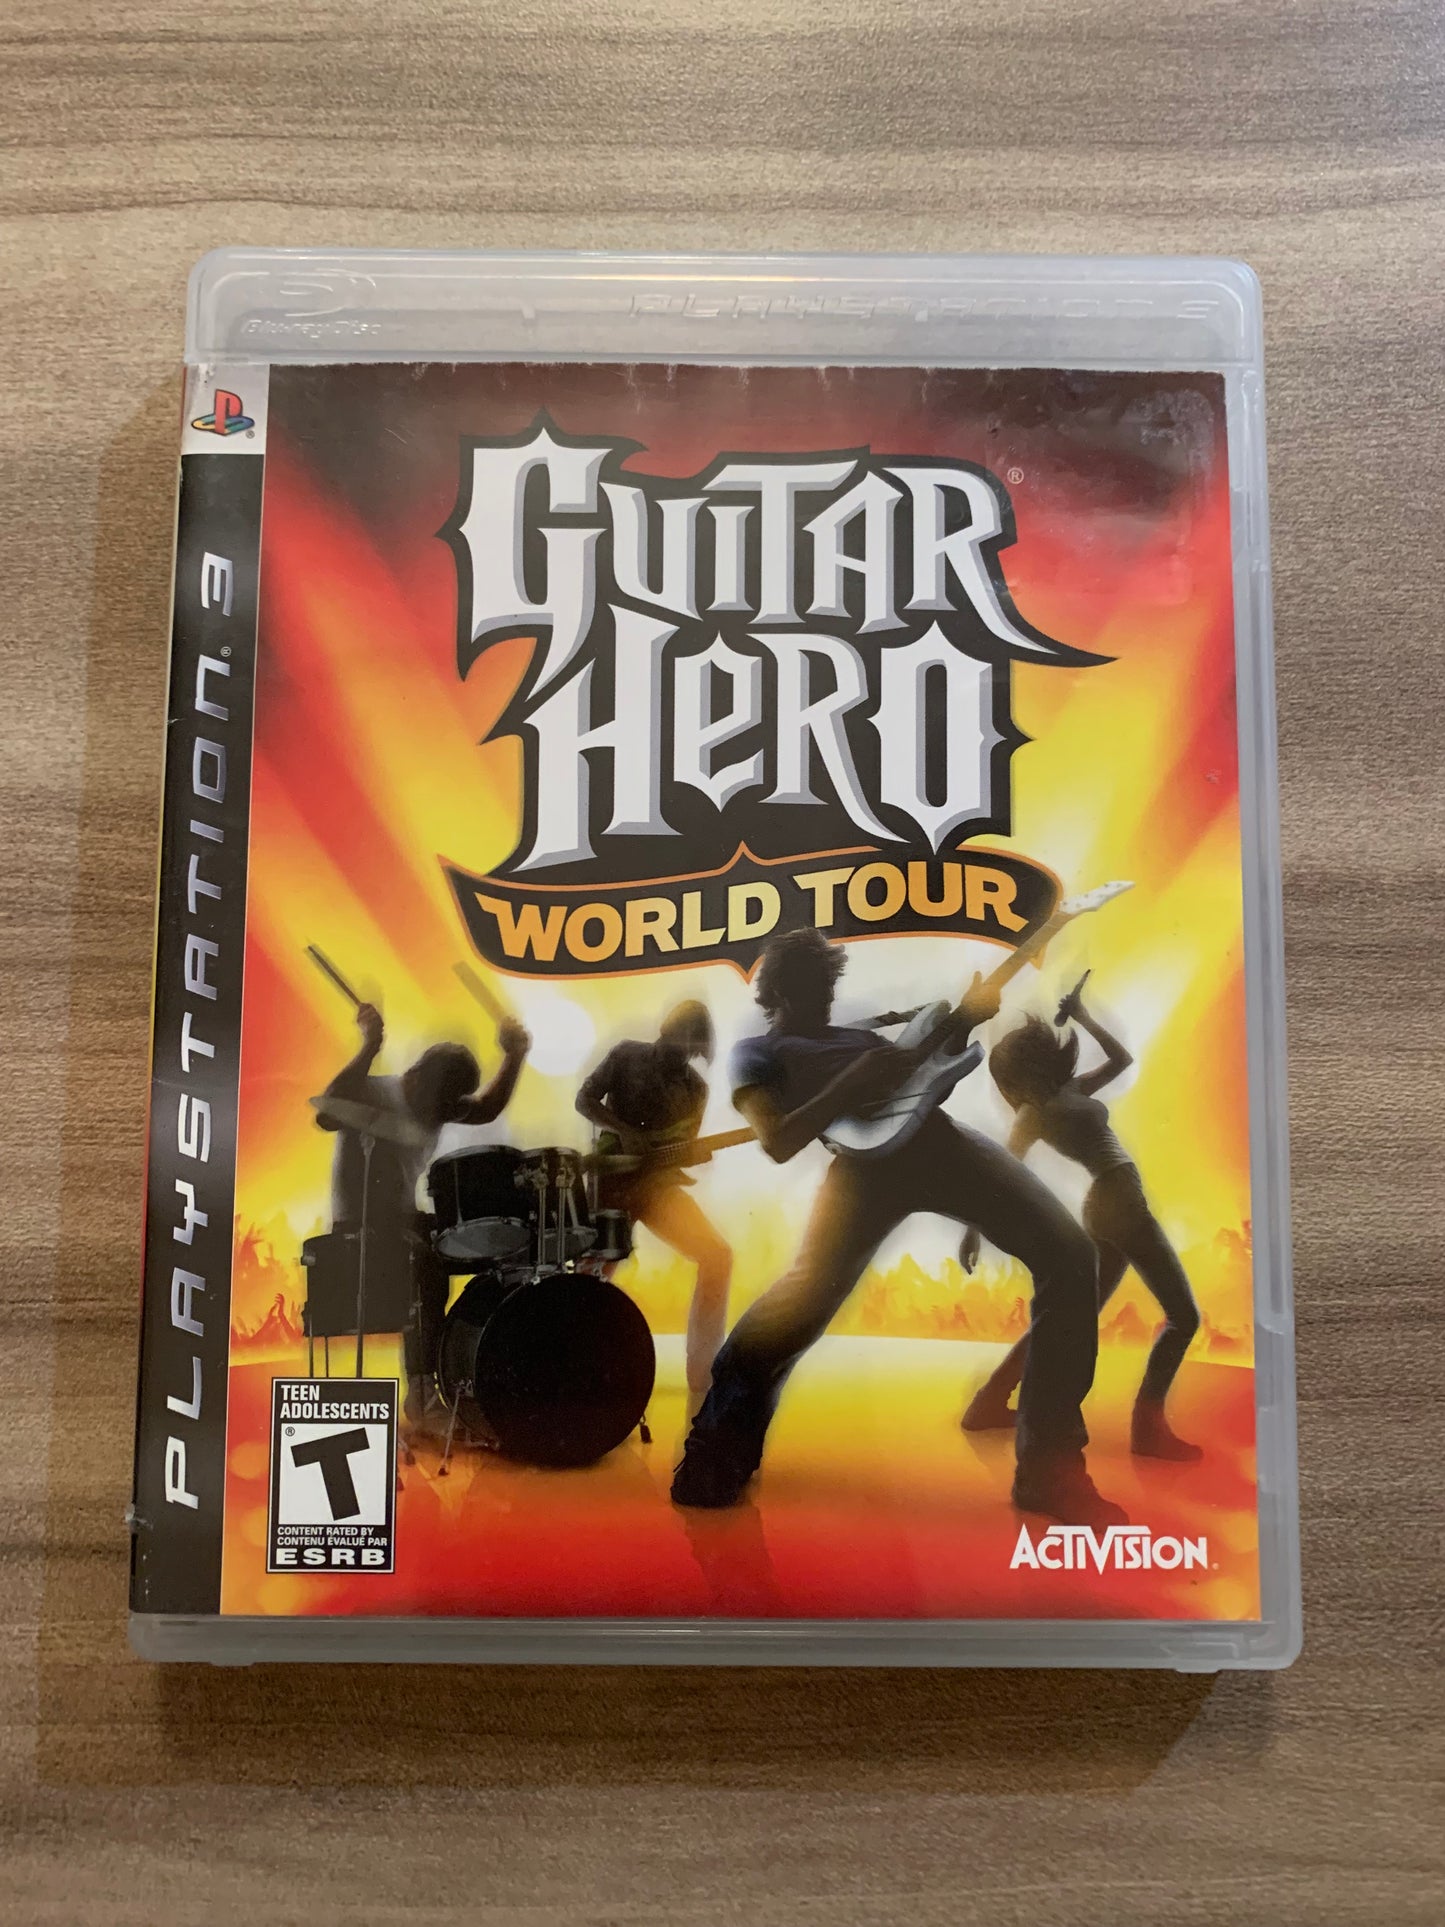 SONY PLAYSTATiON 3 [PS3] | GUiTAR HERO WORLD TOUR